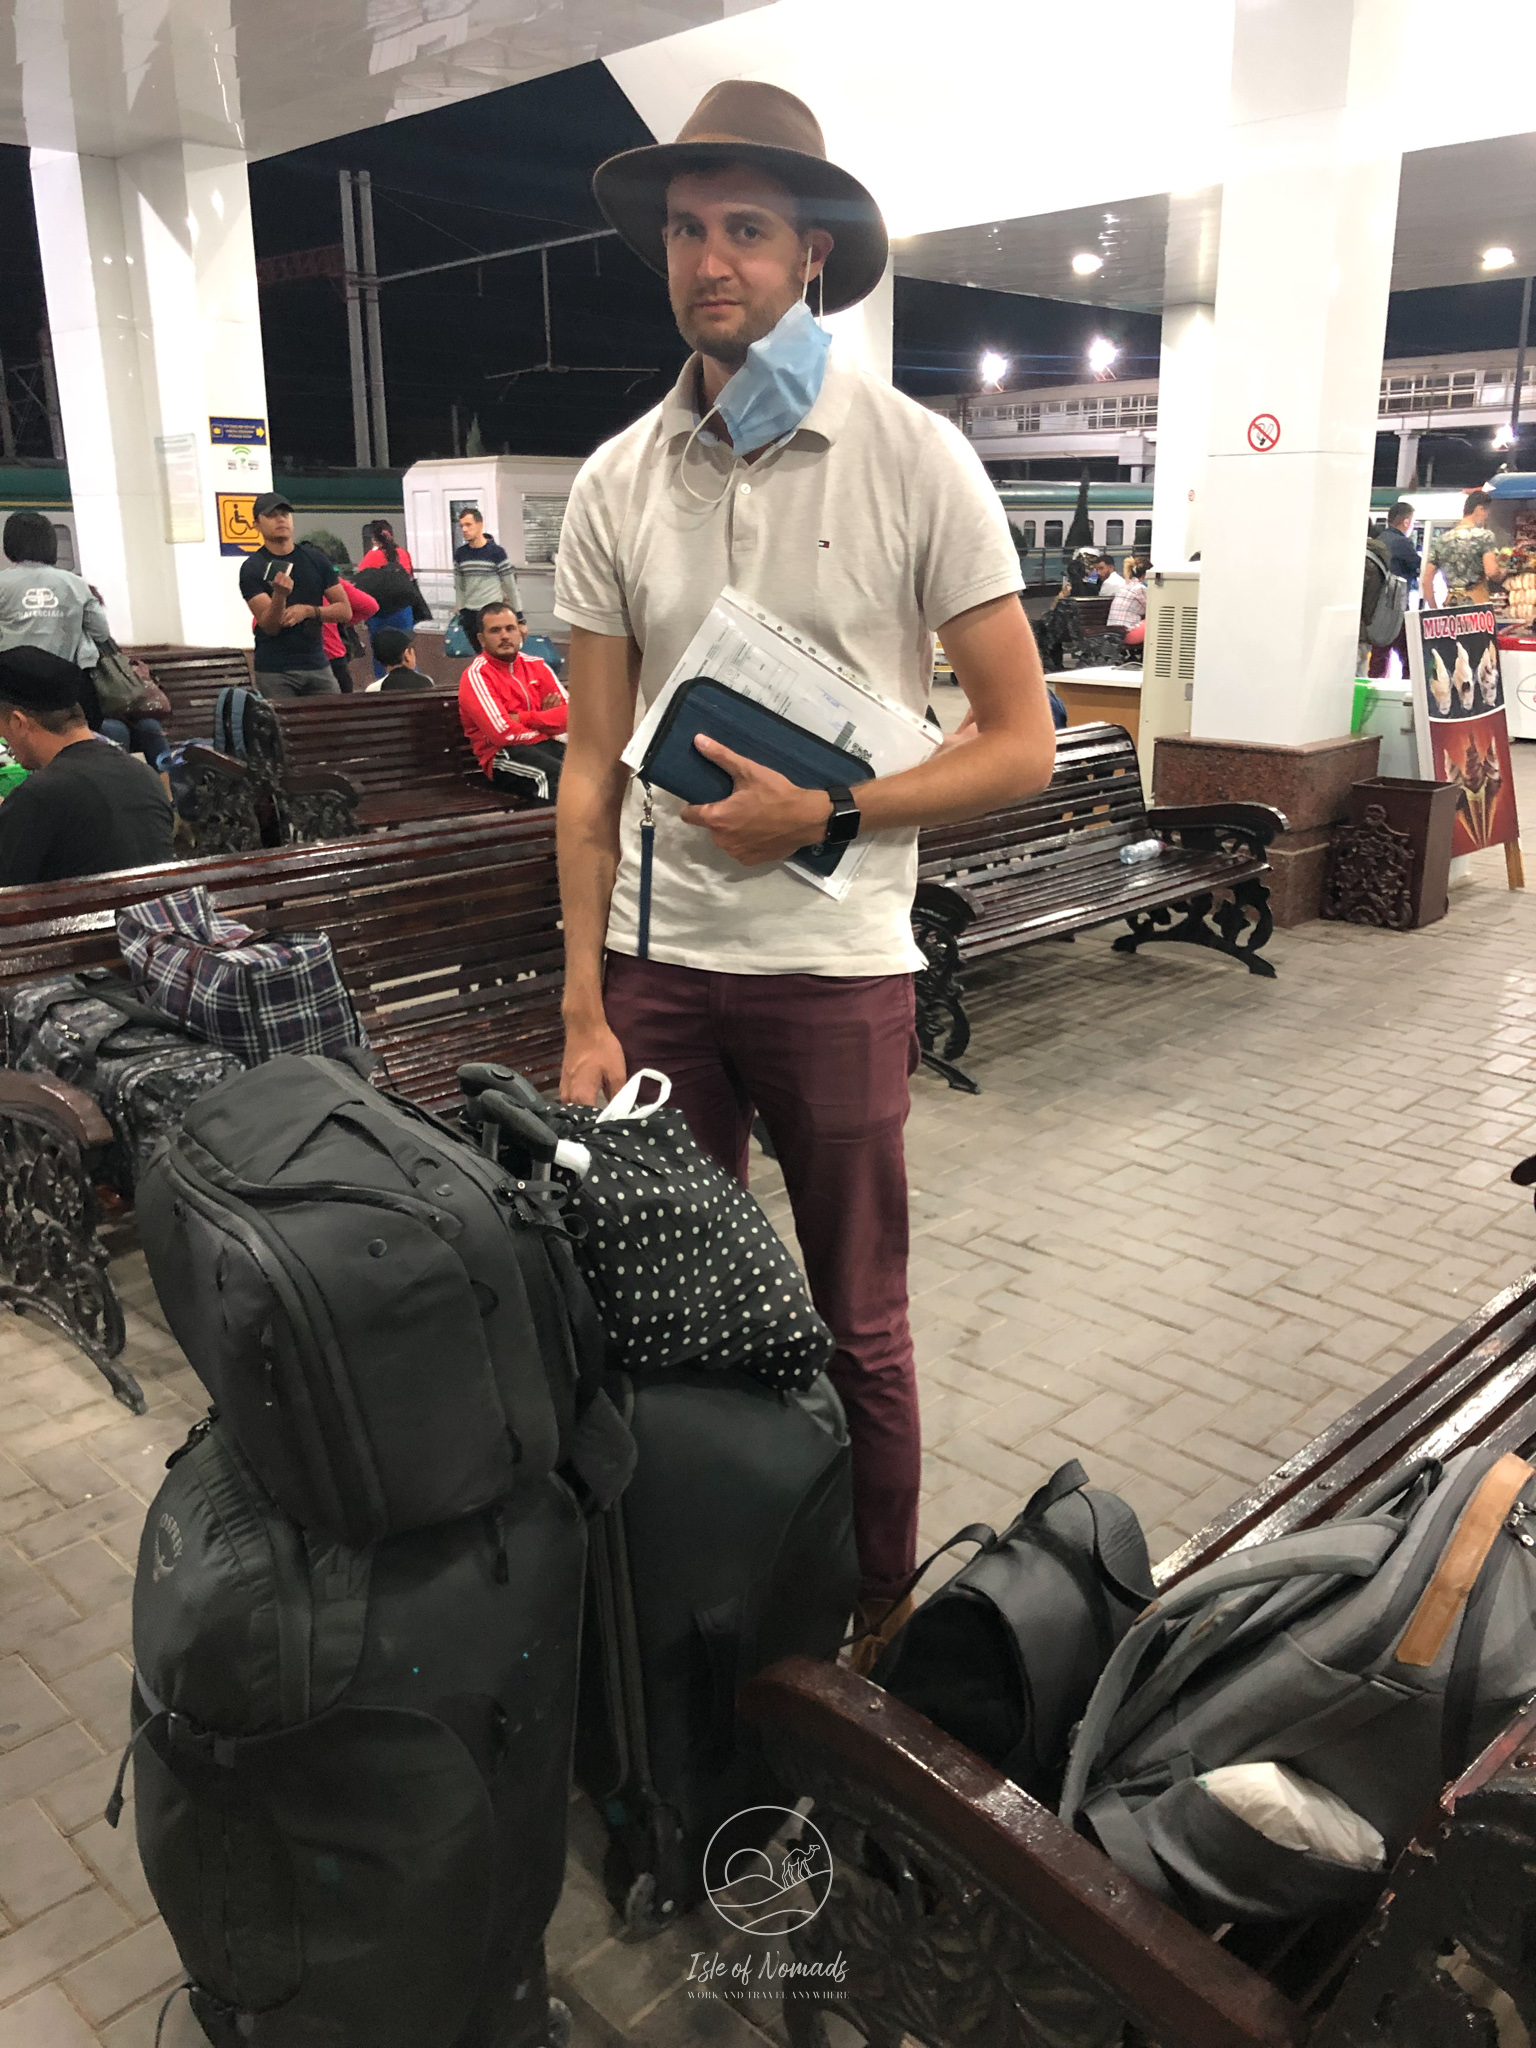 Cordt at the train station in Tashkent, after we had not very effectively packed due to being rushed